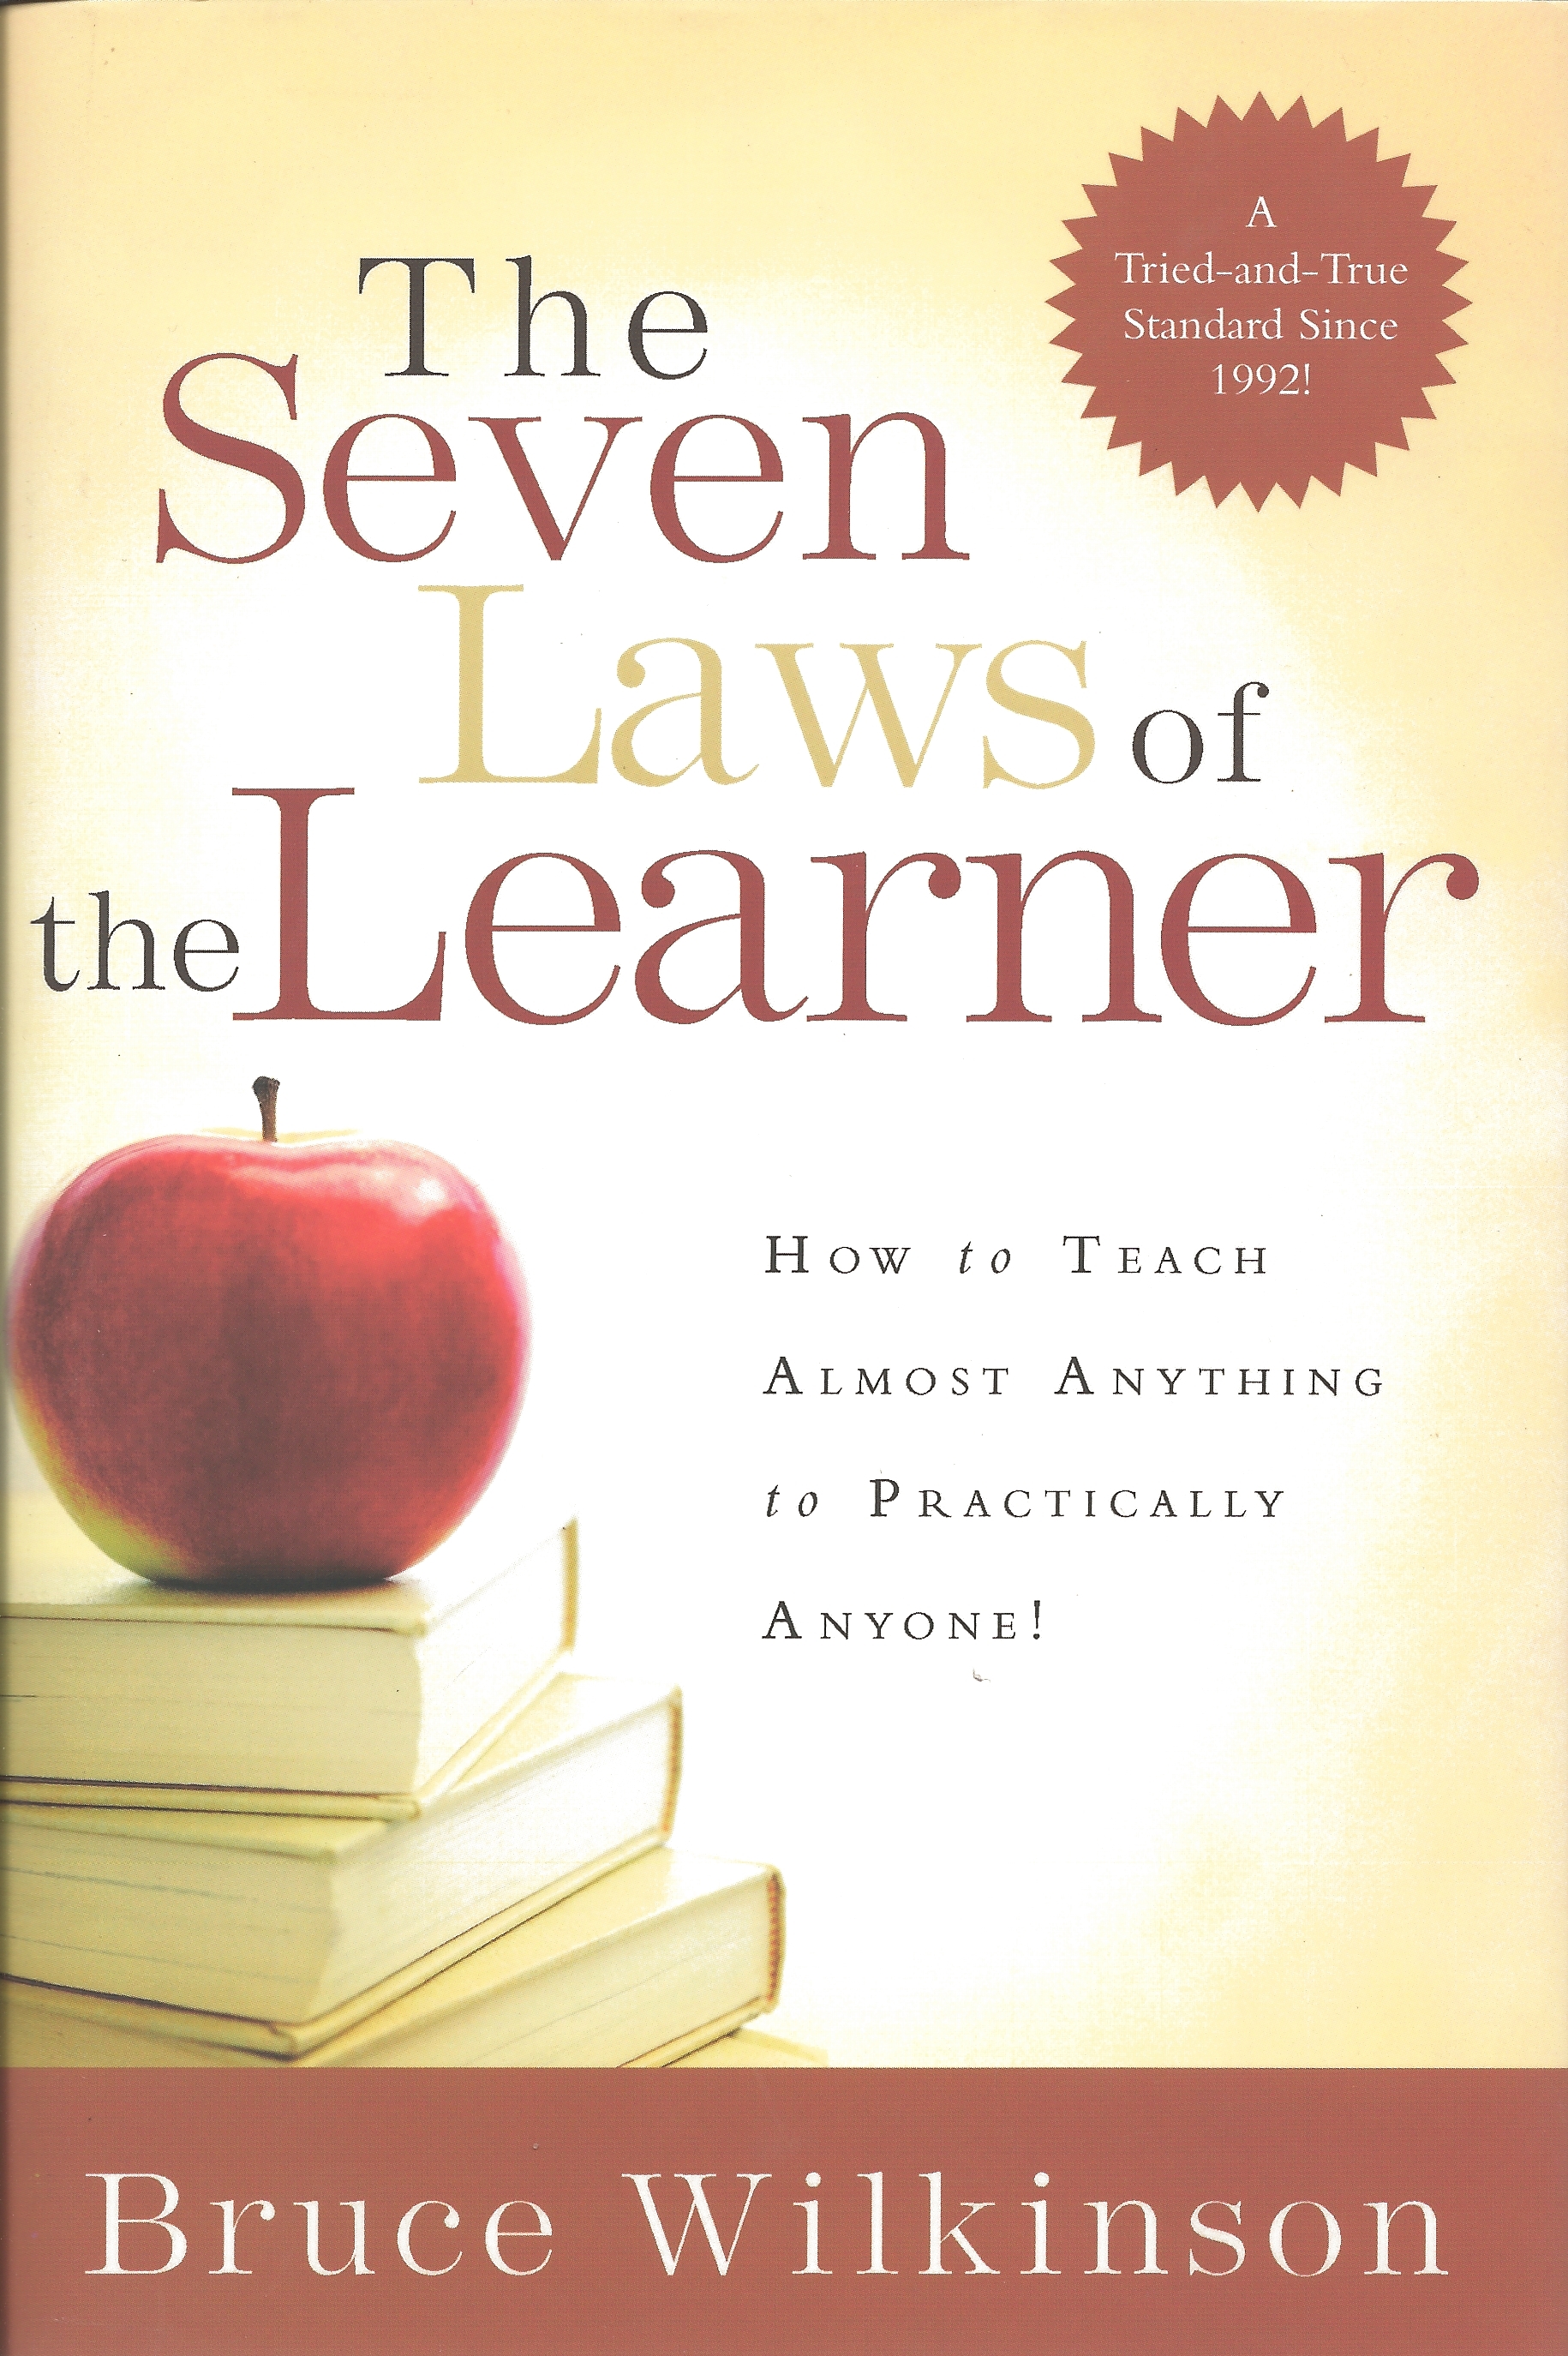 THE SEVEN LAWS OF THE LEARNER Bruce Wilkinson